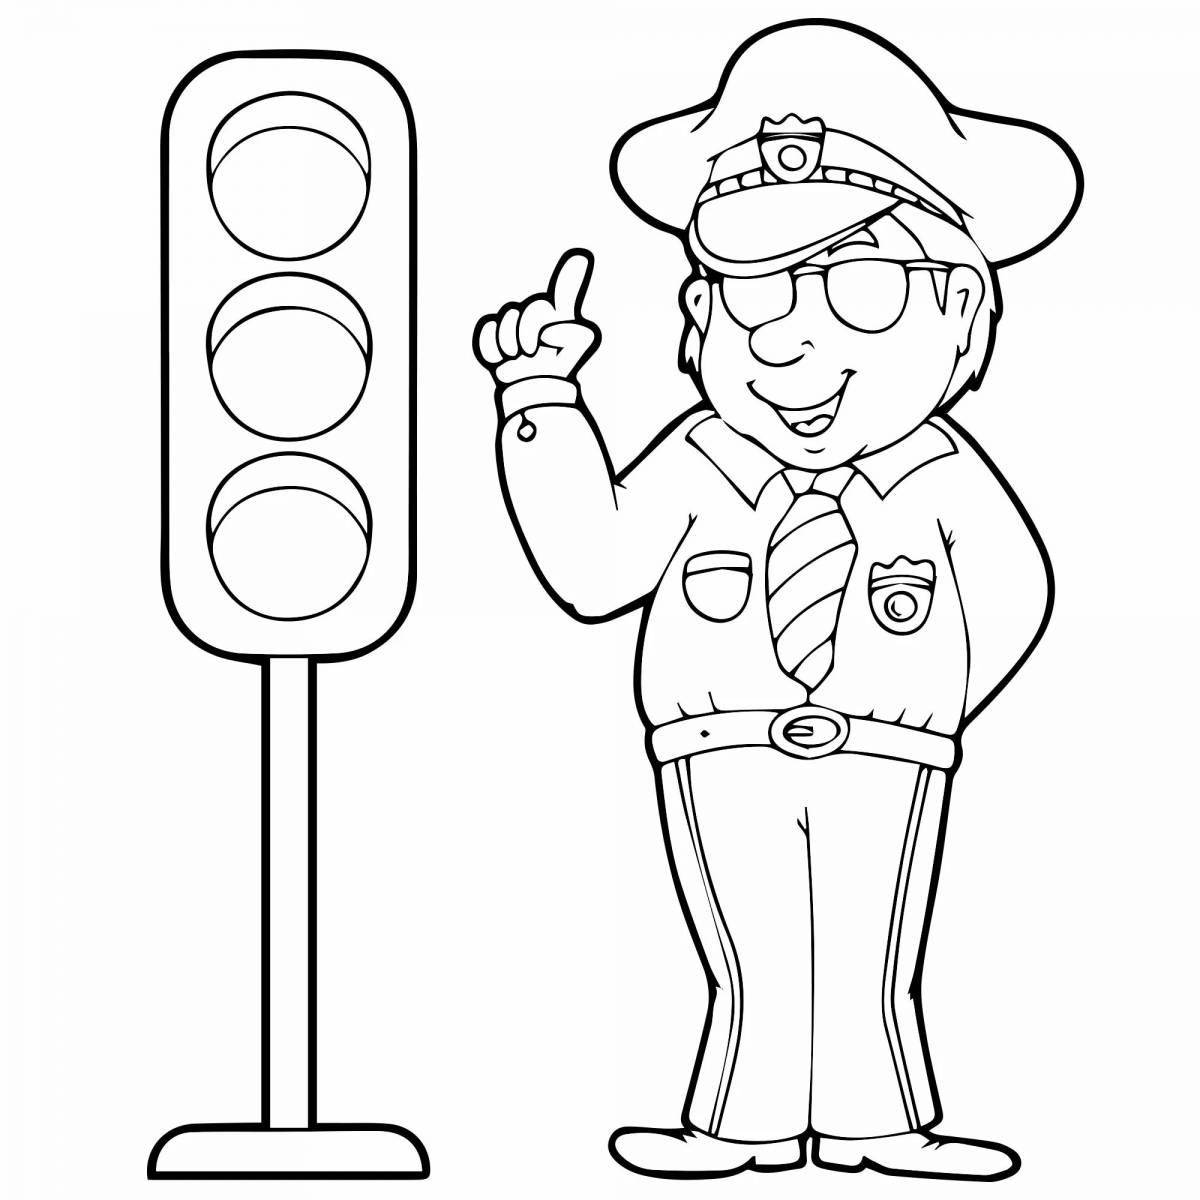 Cheerful traffic controller coloring for kids